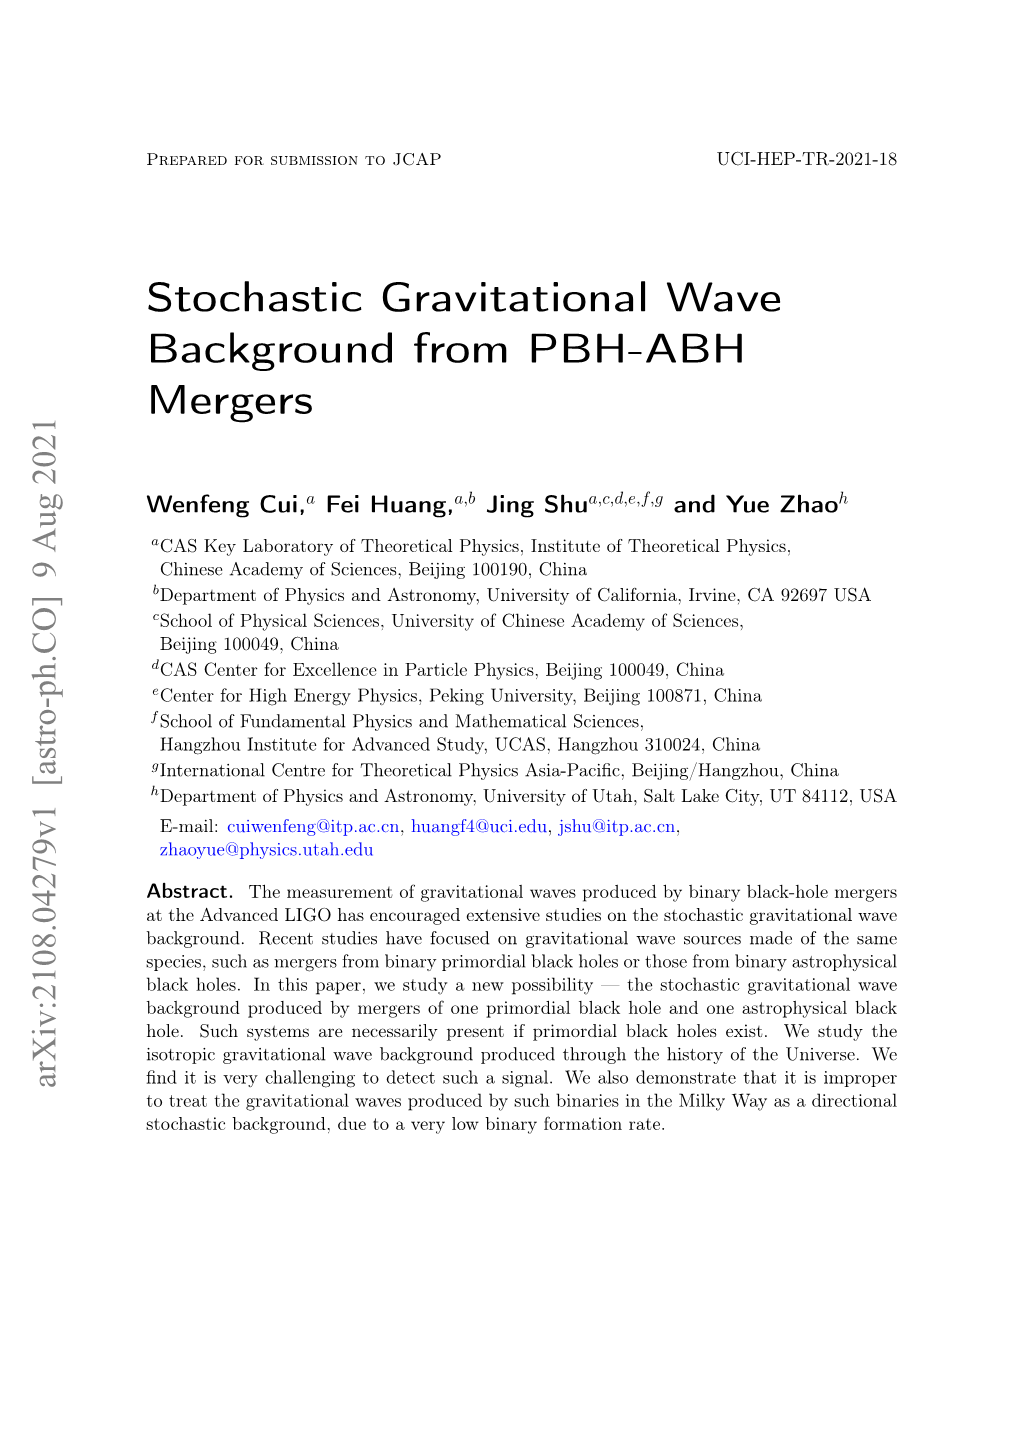 Stochastic Gravitational Wave Background from PBH-ABH Mergers